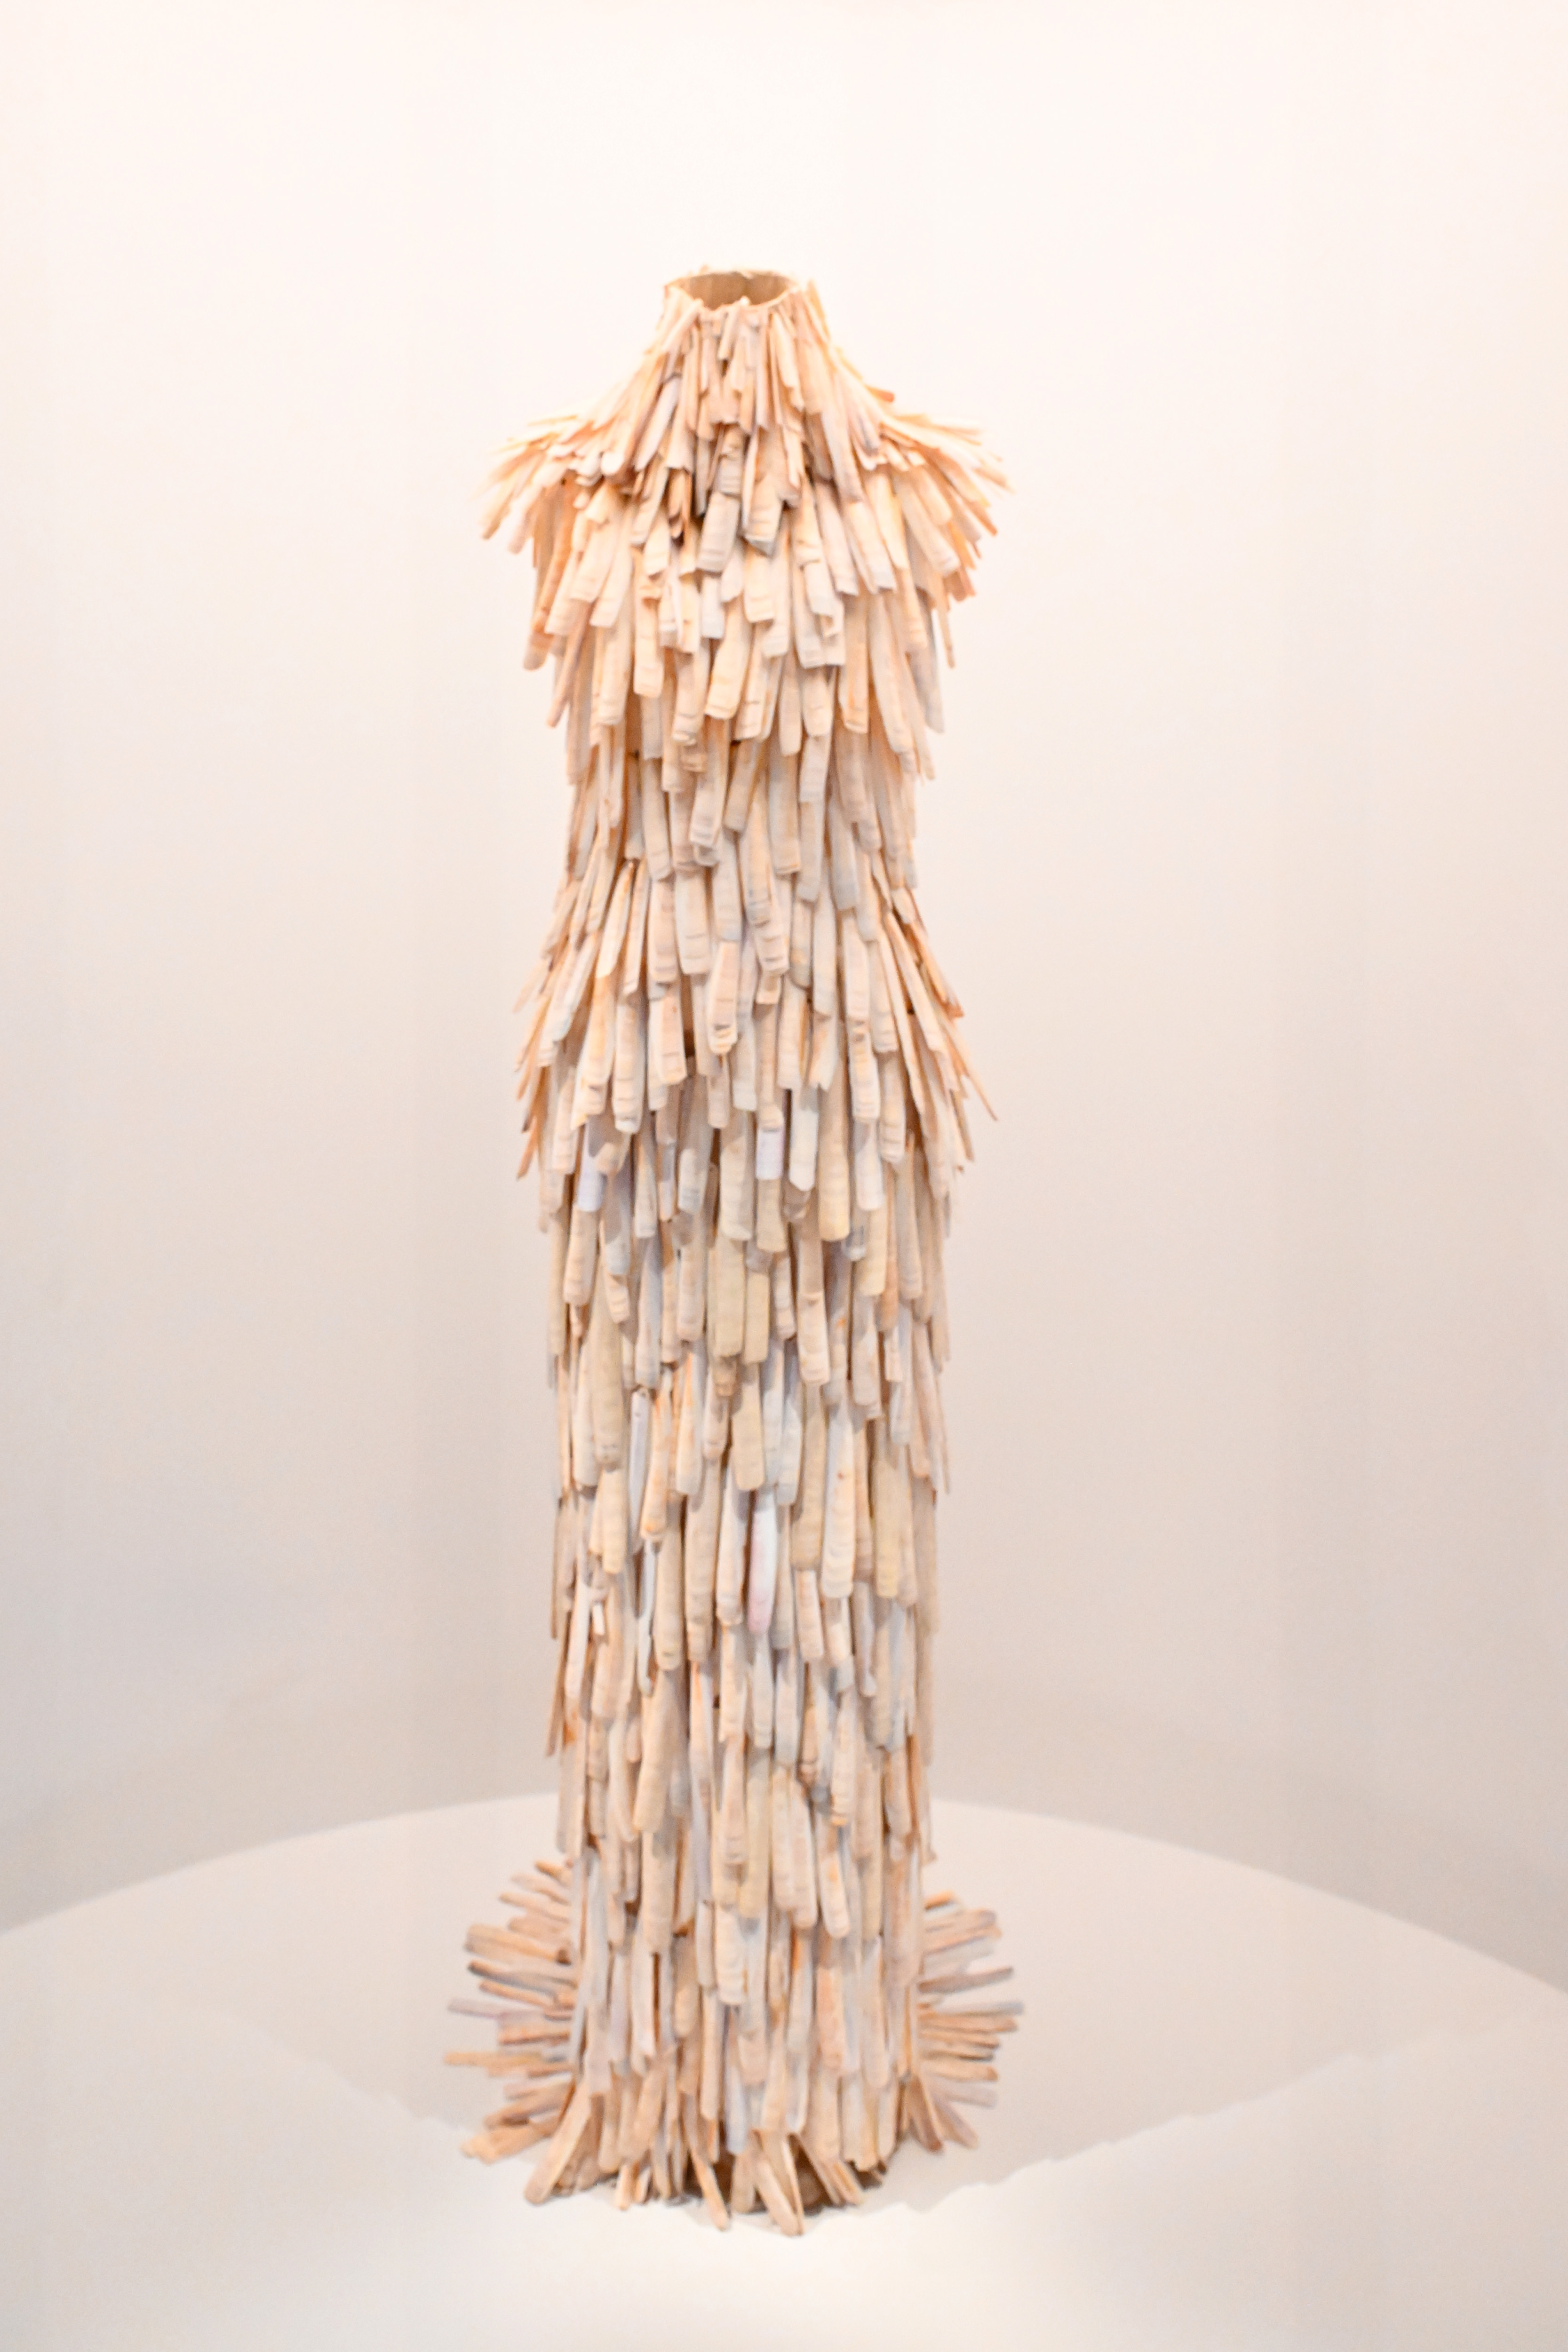 Sculptural dress made of layered material on a mannequin, displayed in a gallery setting